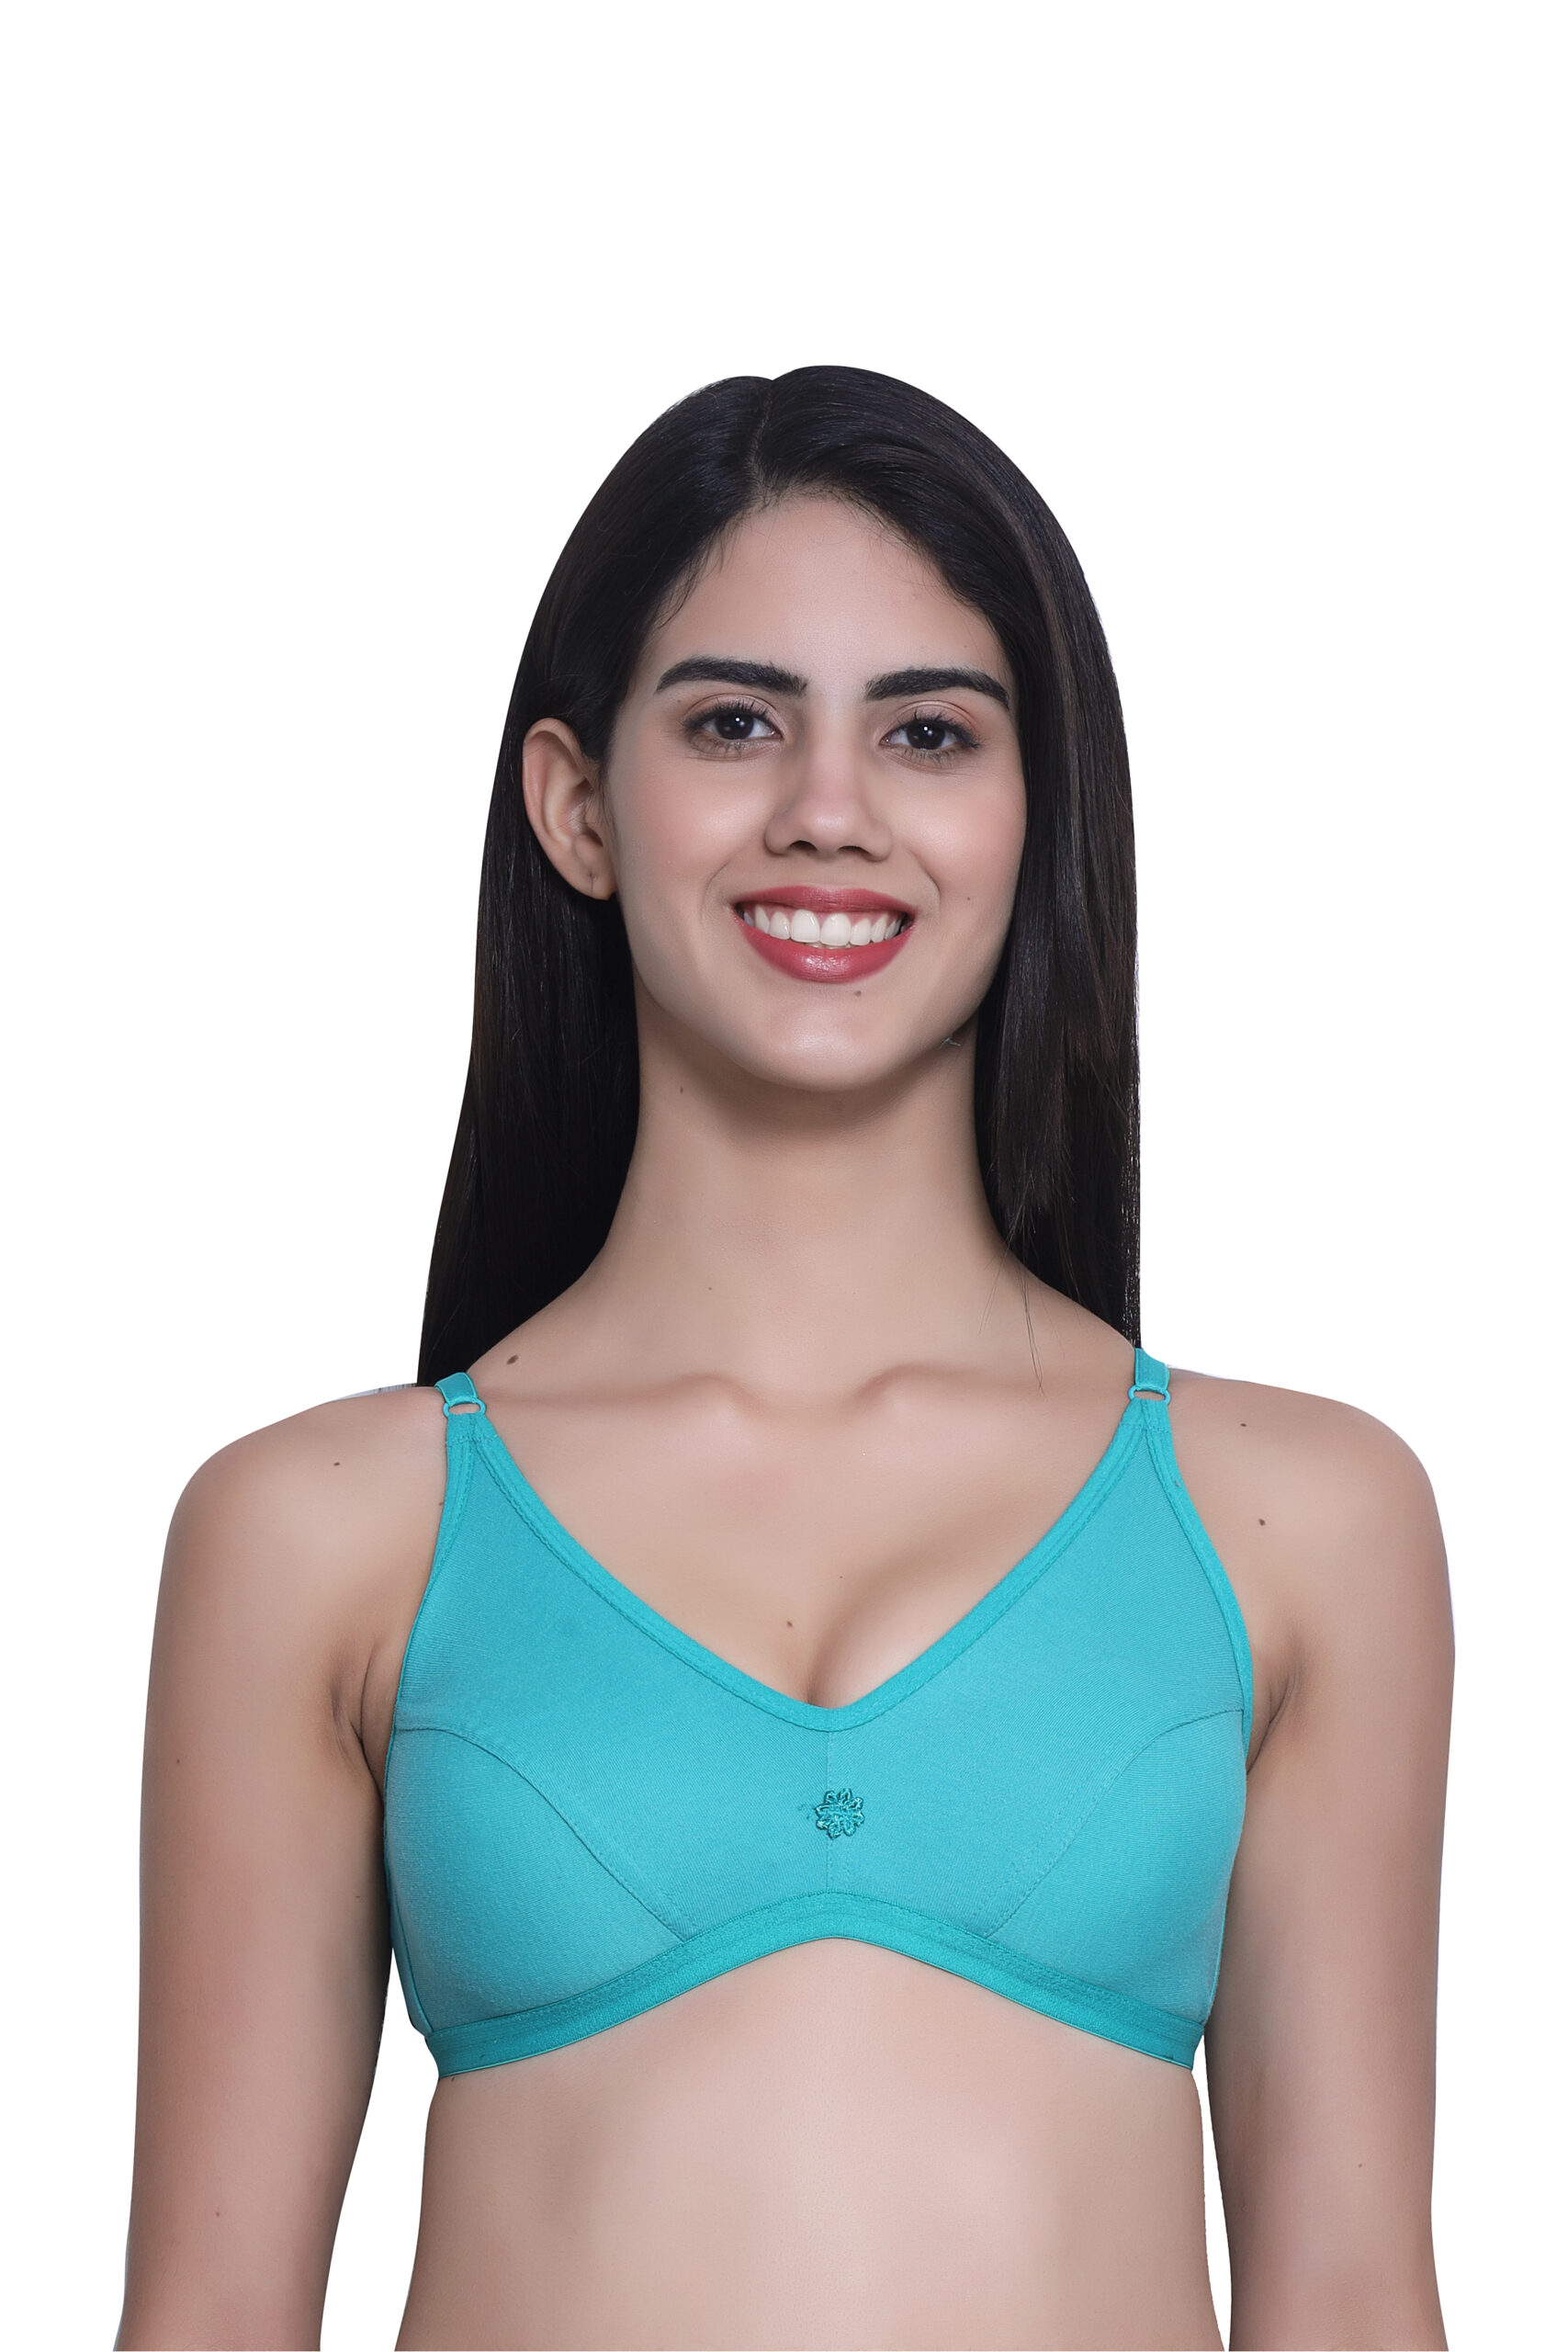 Get Premium Quality Non-Padded Bra Only ₹199-/ Shipping Free - Manufacturer  and Exporter of women Wear